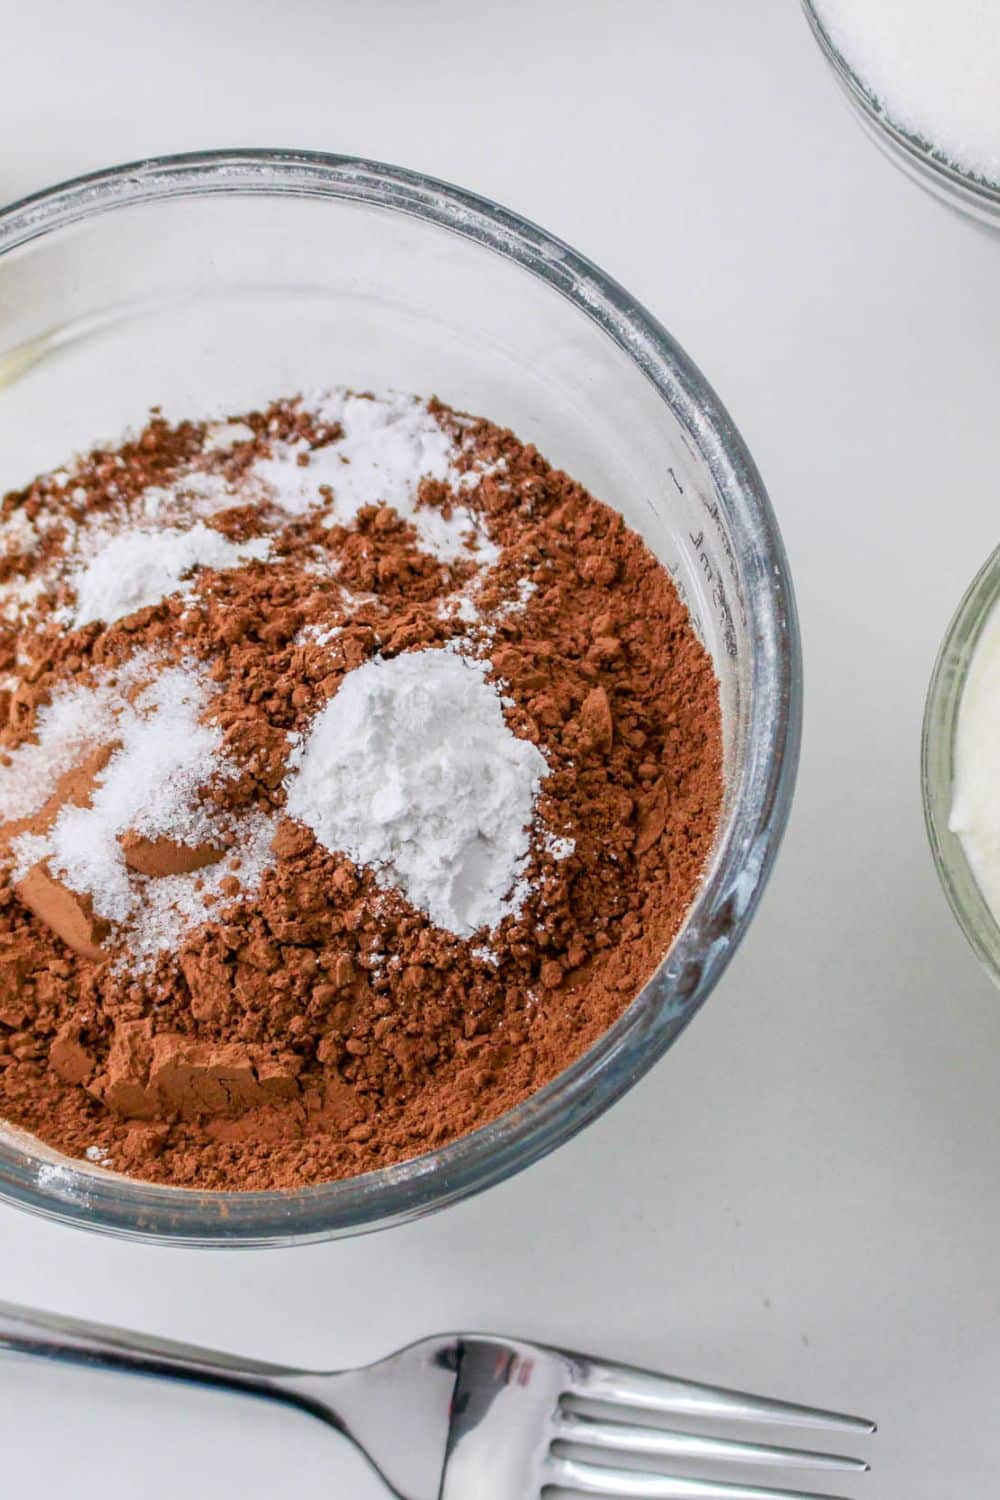 dry ingredients in a small bowl on table for adding to cake. -Flour, cocoa powder, baking soda, baking powder, salt.